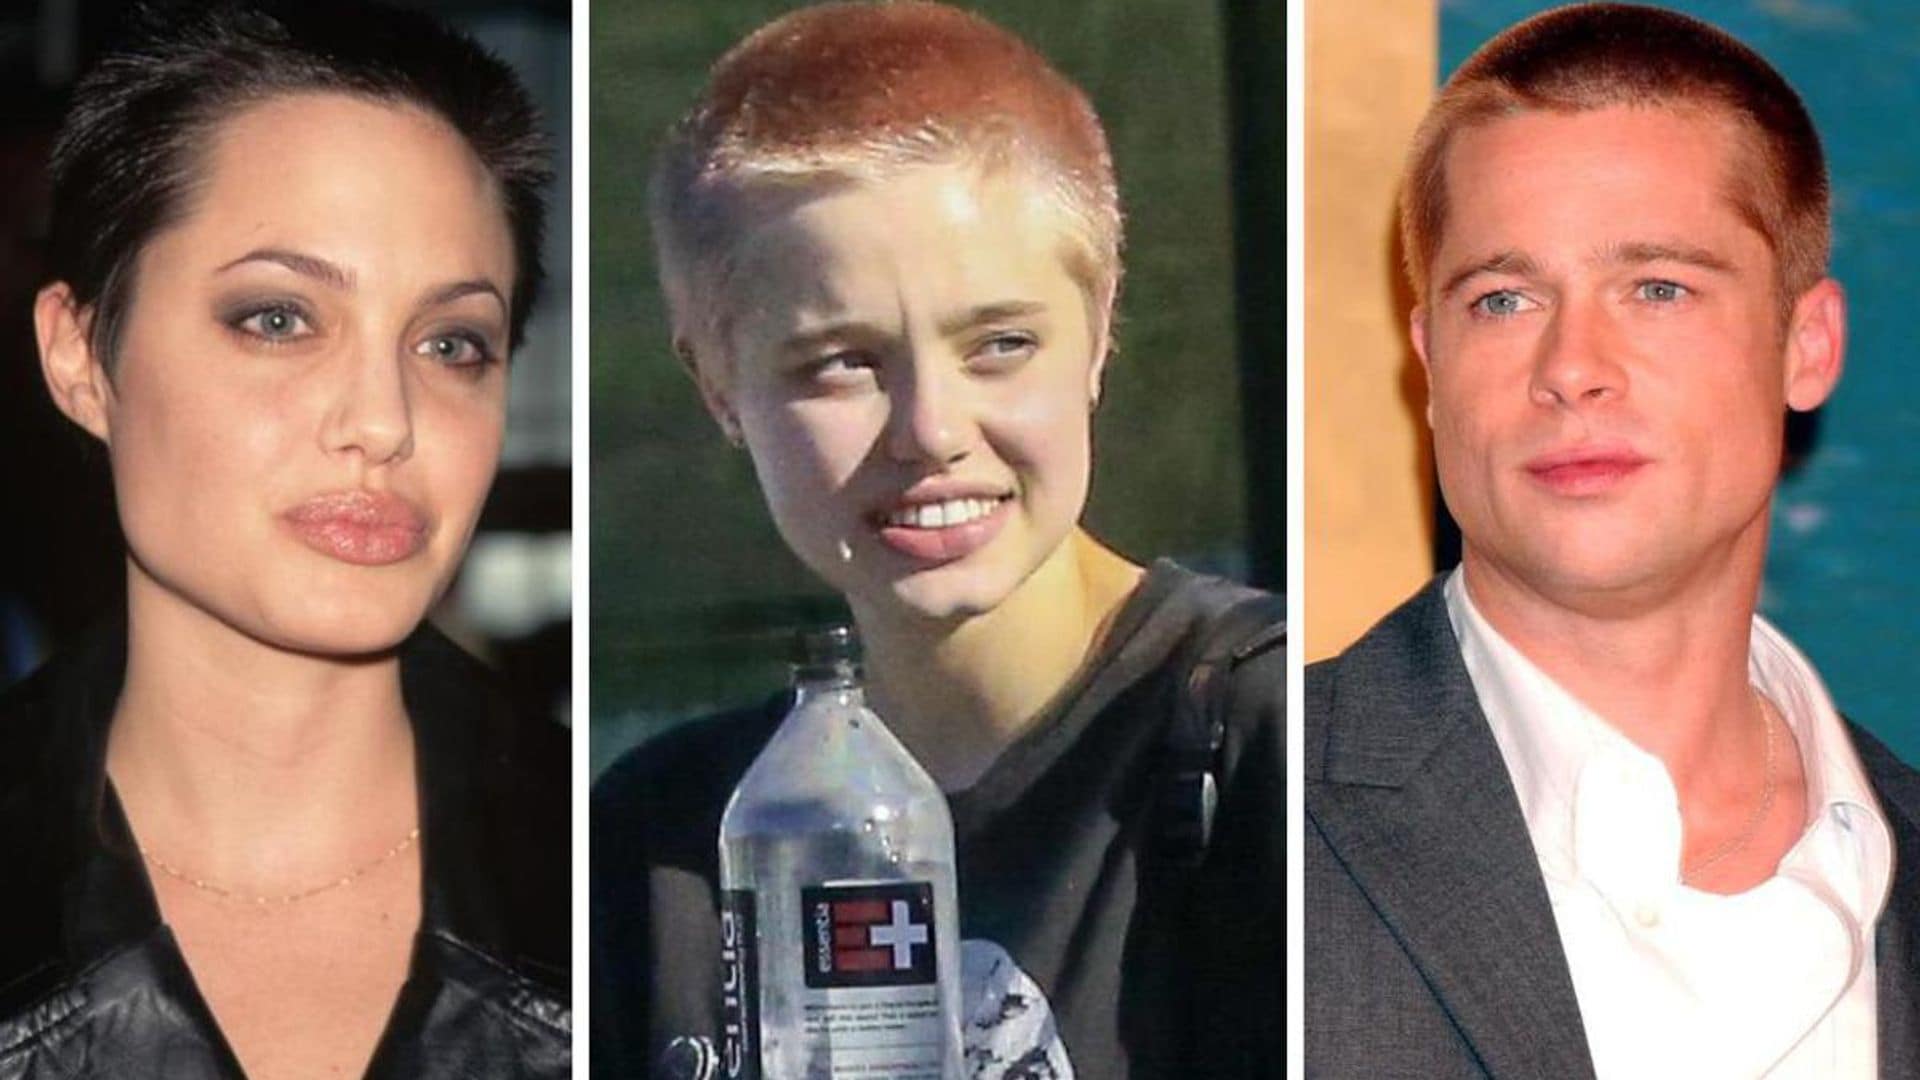 Shiloh Jolie-Pitt debuted a new pink buzzcut and she’s never looked more like Angelina and Brad